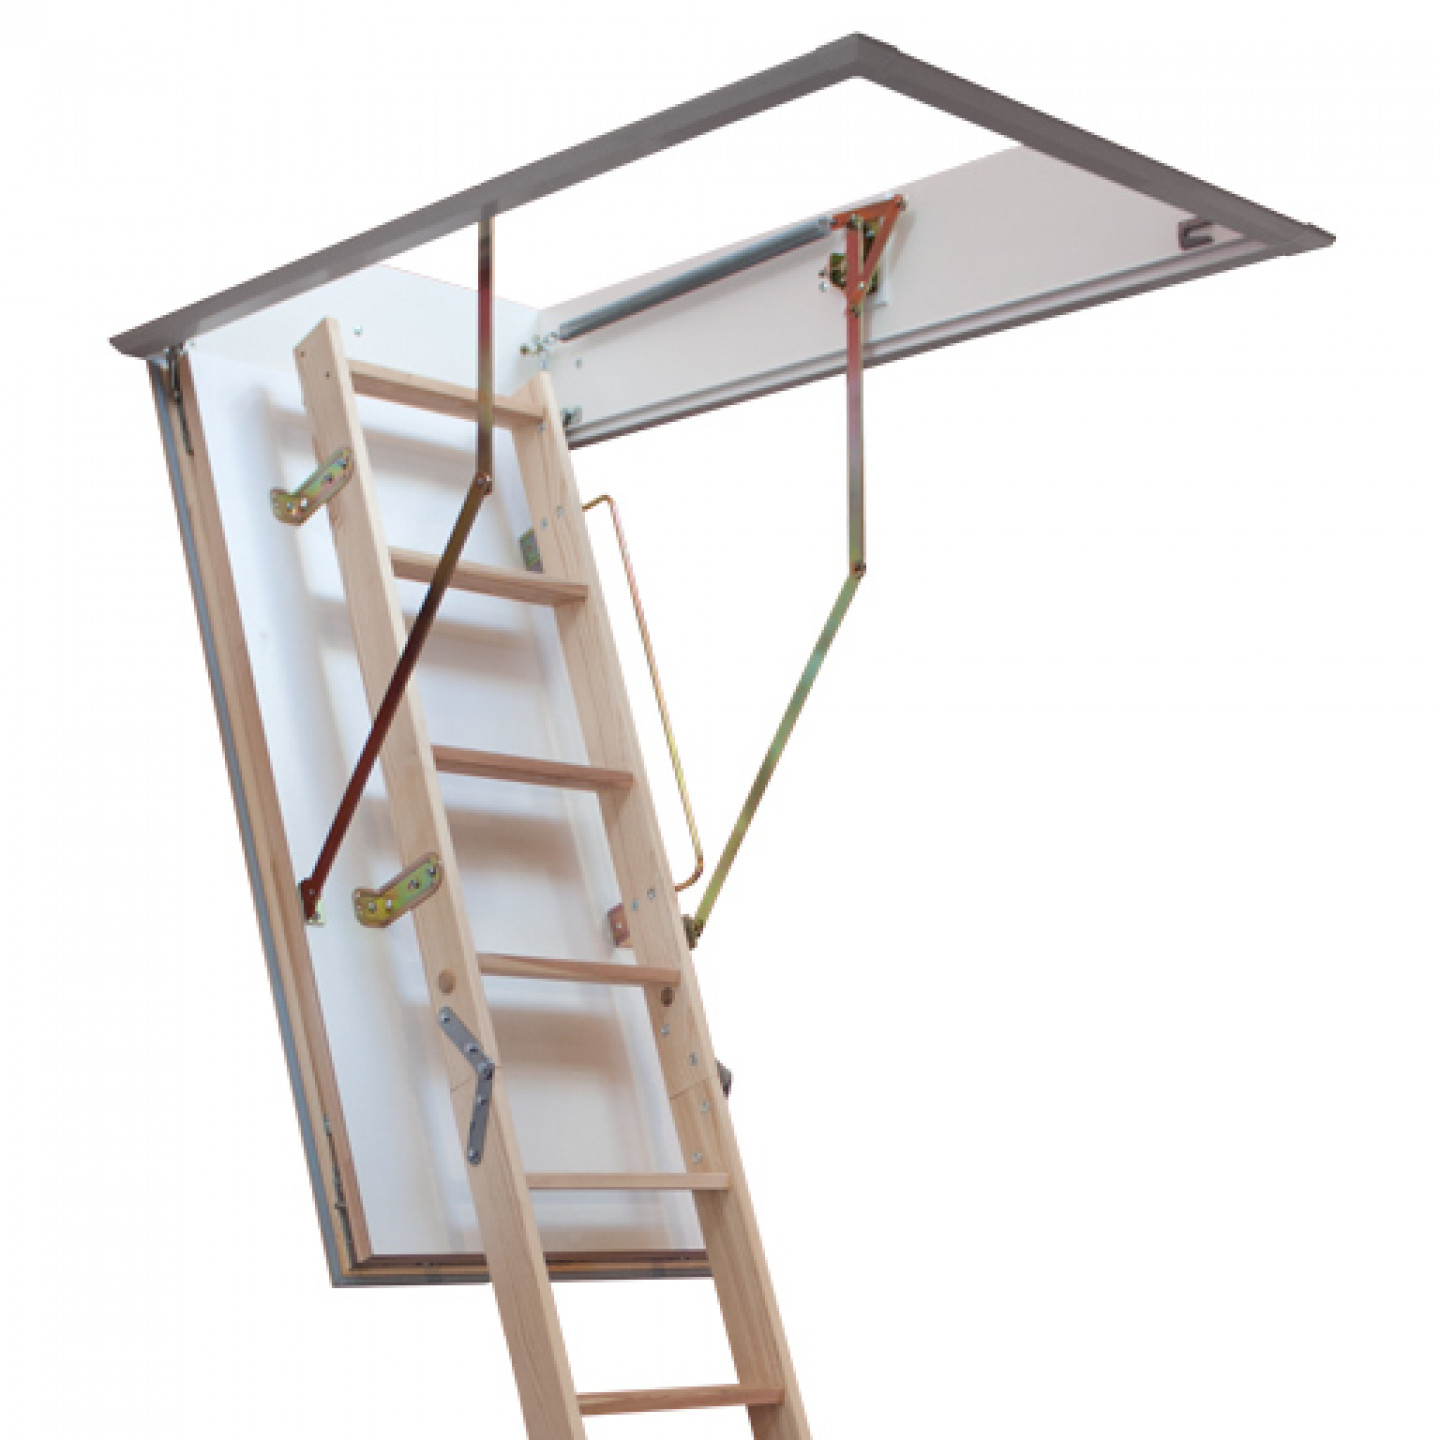 Building a Loft Ladder has many benefits. What are they?